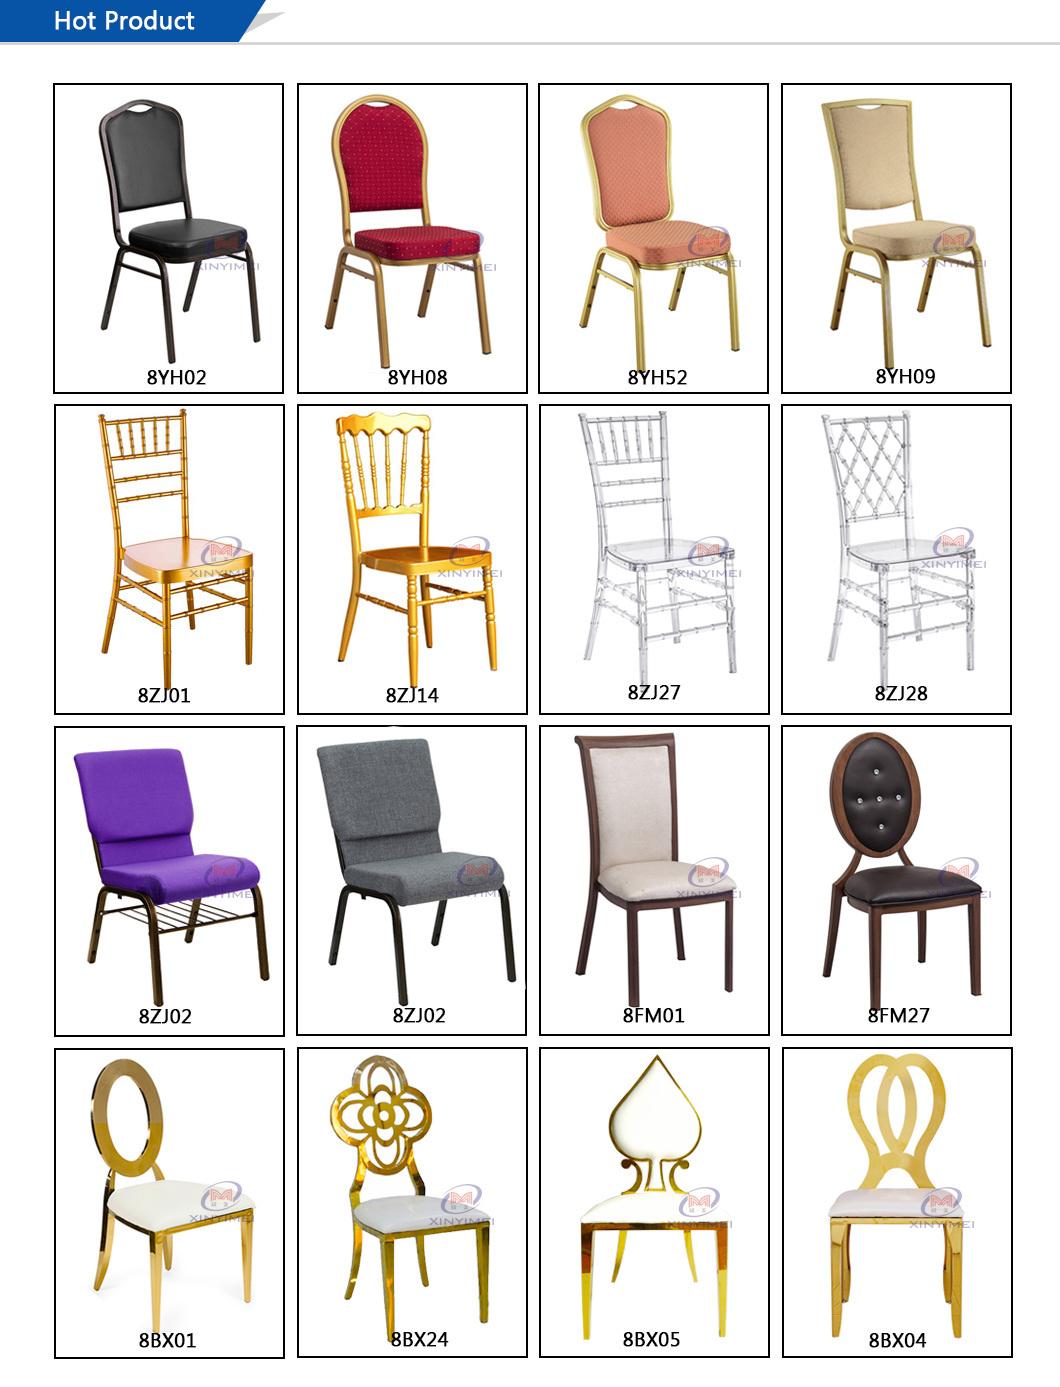 3 Years Warranty Used Folded Plastic Event Wedding Chair